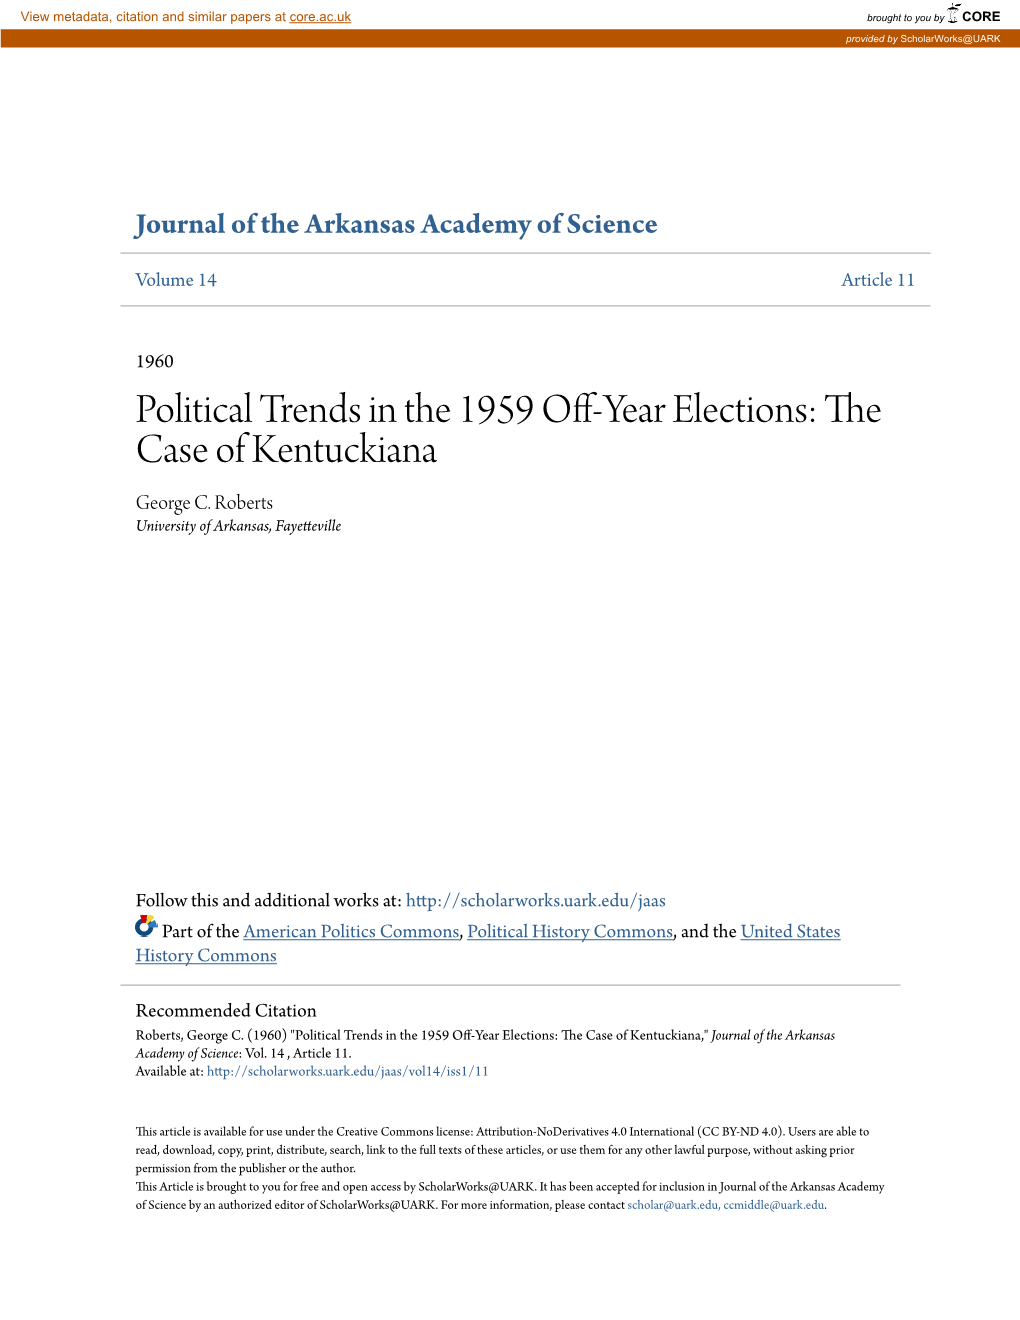 Political Trends in the 1959 Off-Year Elections: the Case of Kentuckiana George C